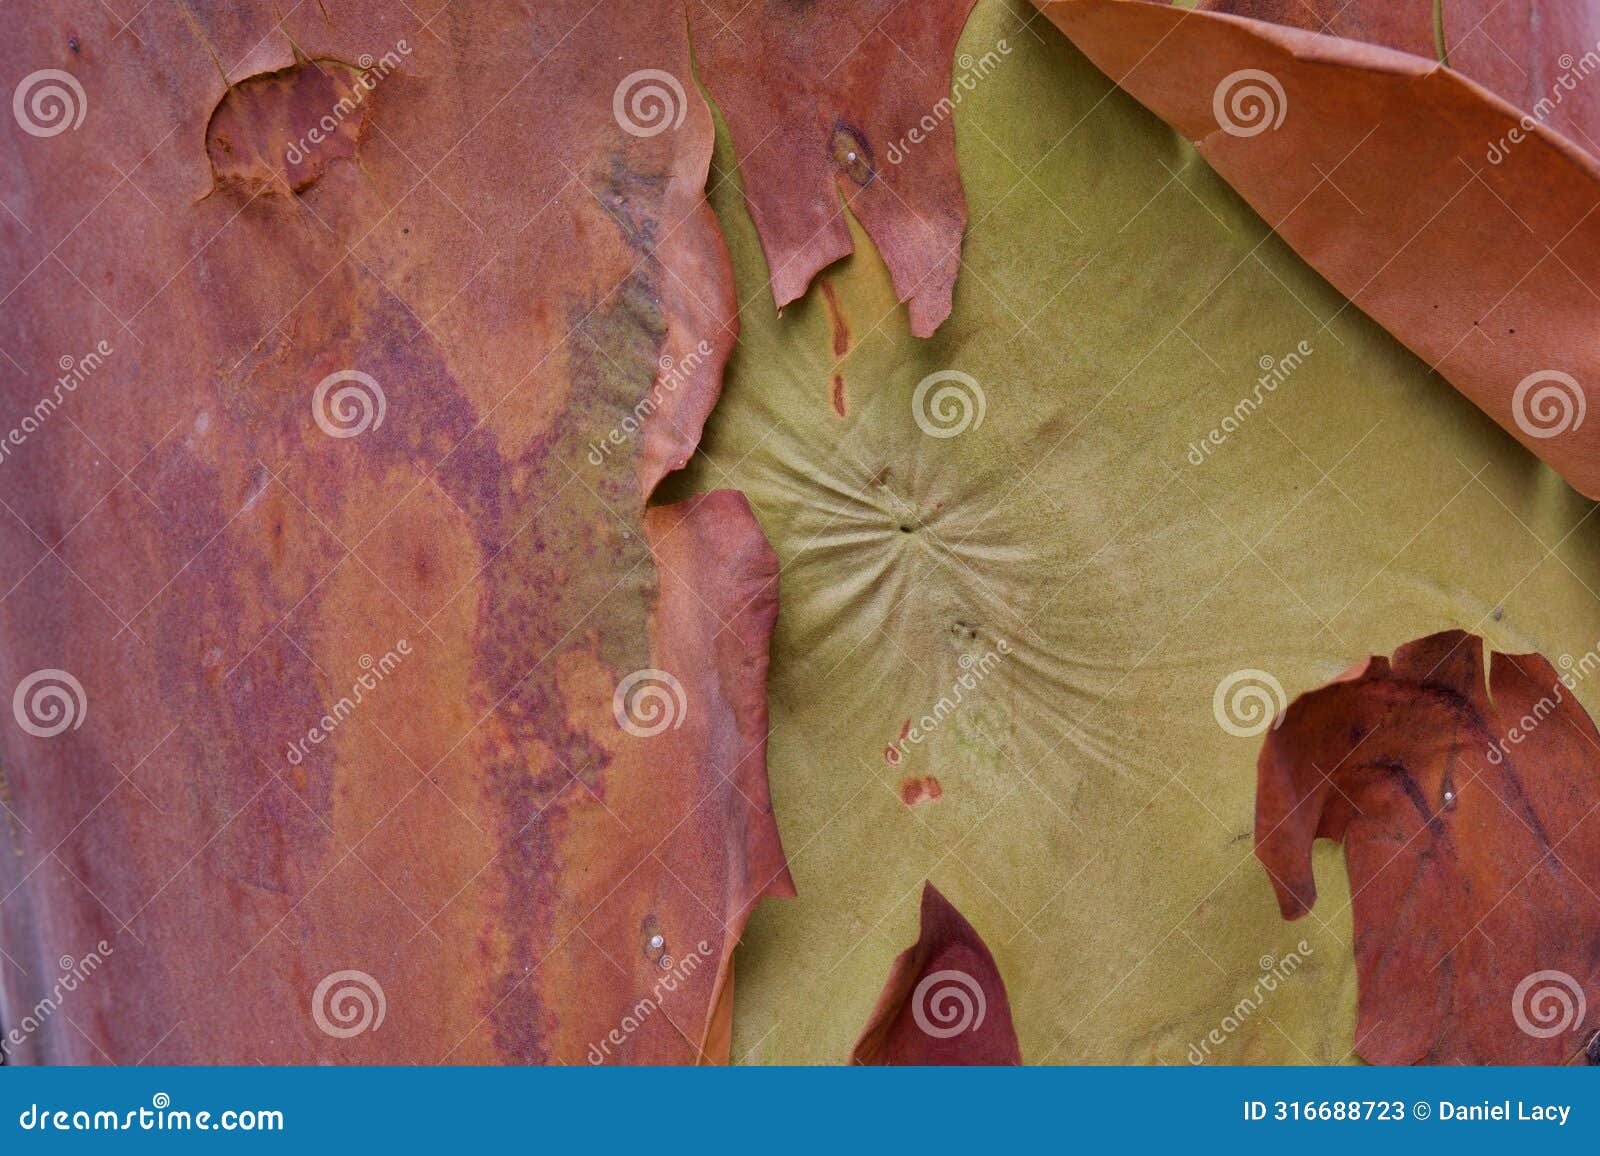 pucker in the ochre coloured bark of an arbutus tree trunk surrounded by reddish peeling bark